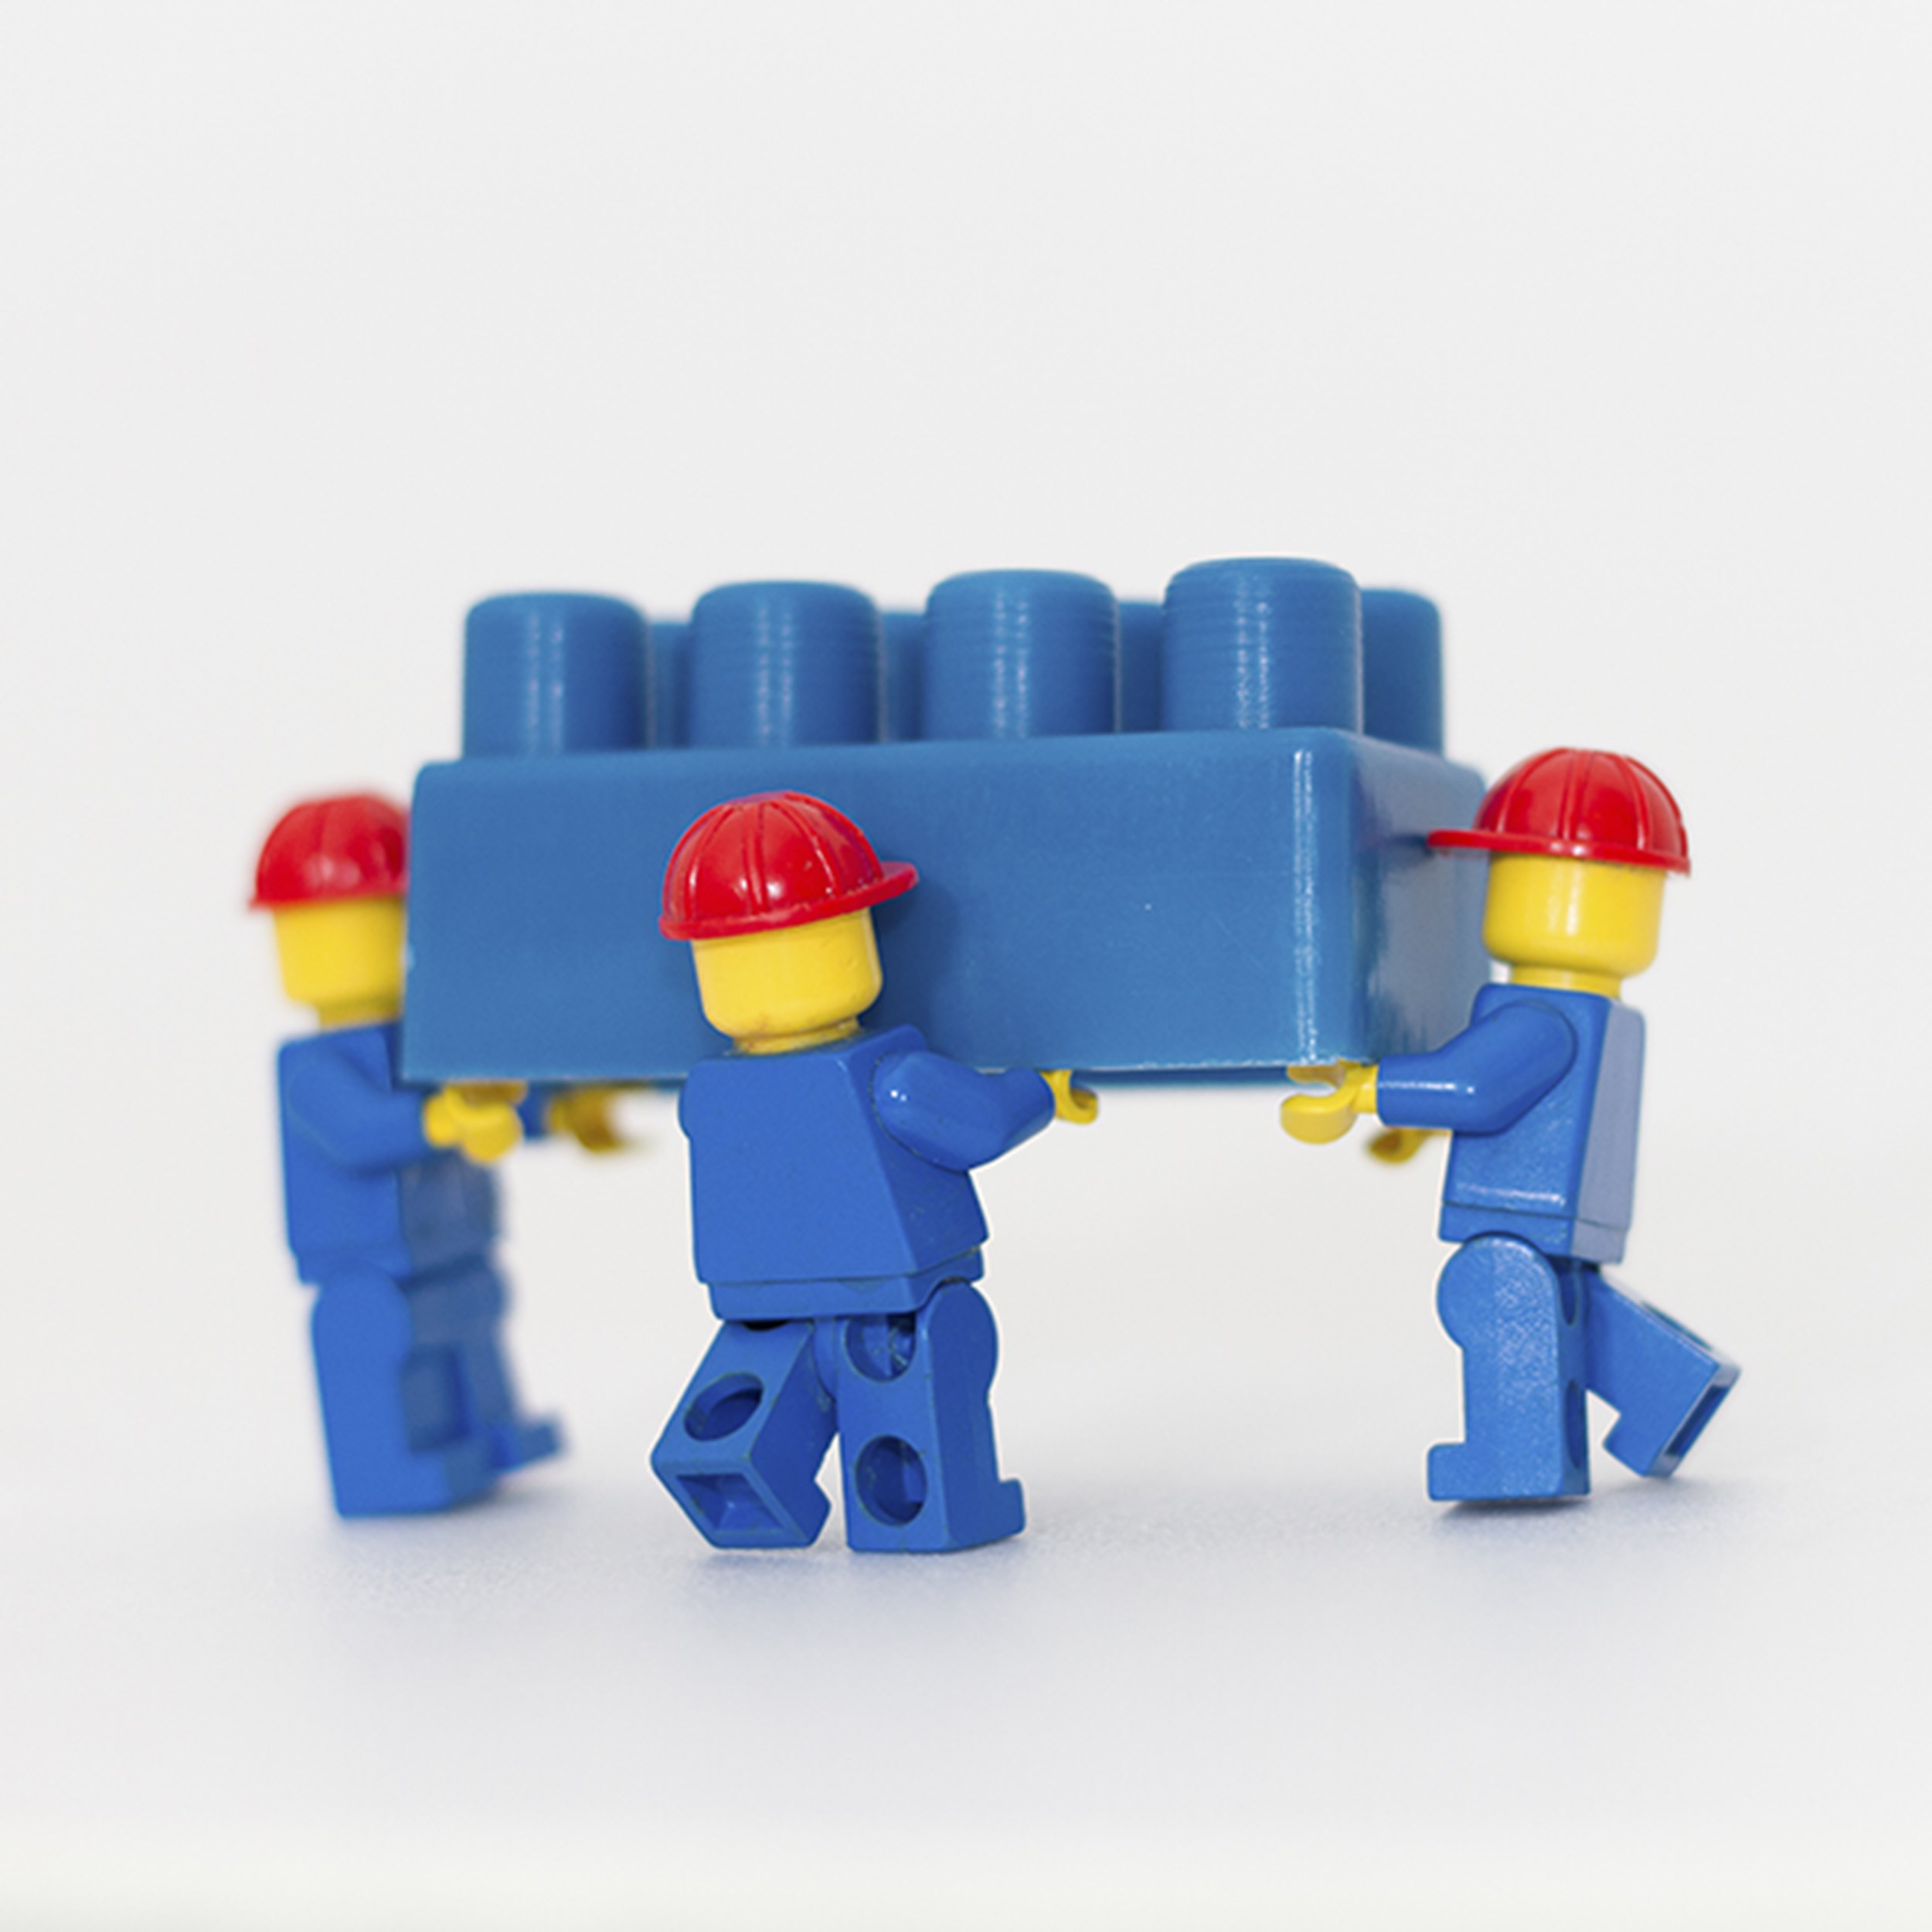 Composable-Commerce-Second-Image-LEGO.png